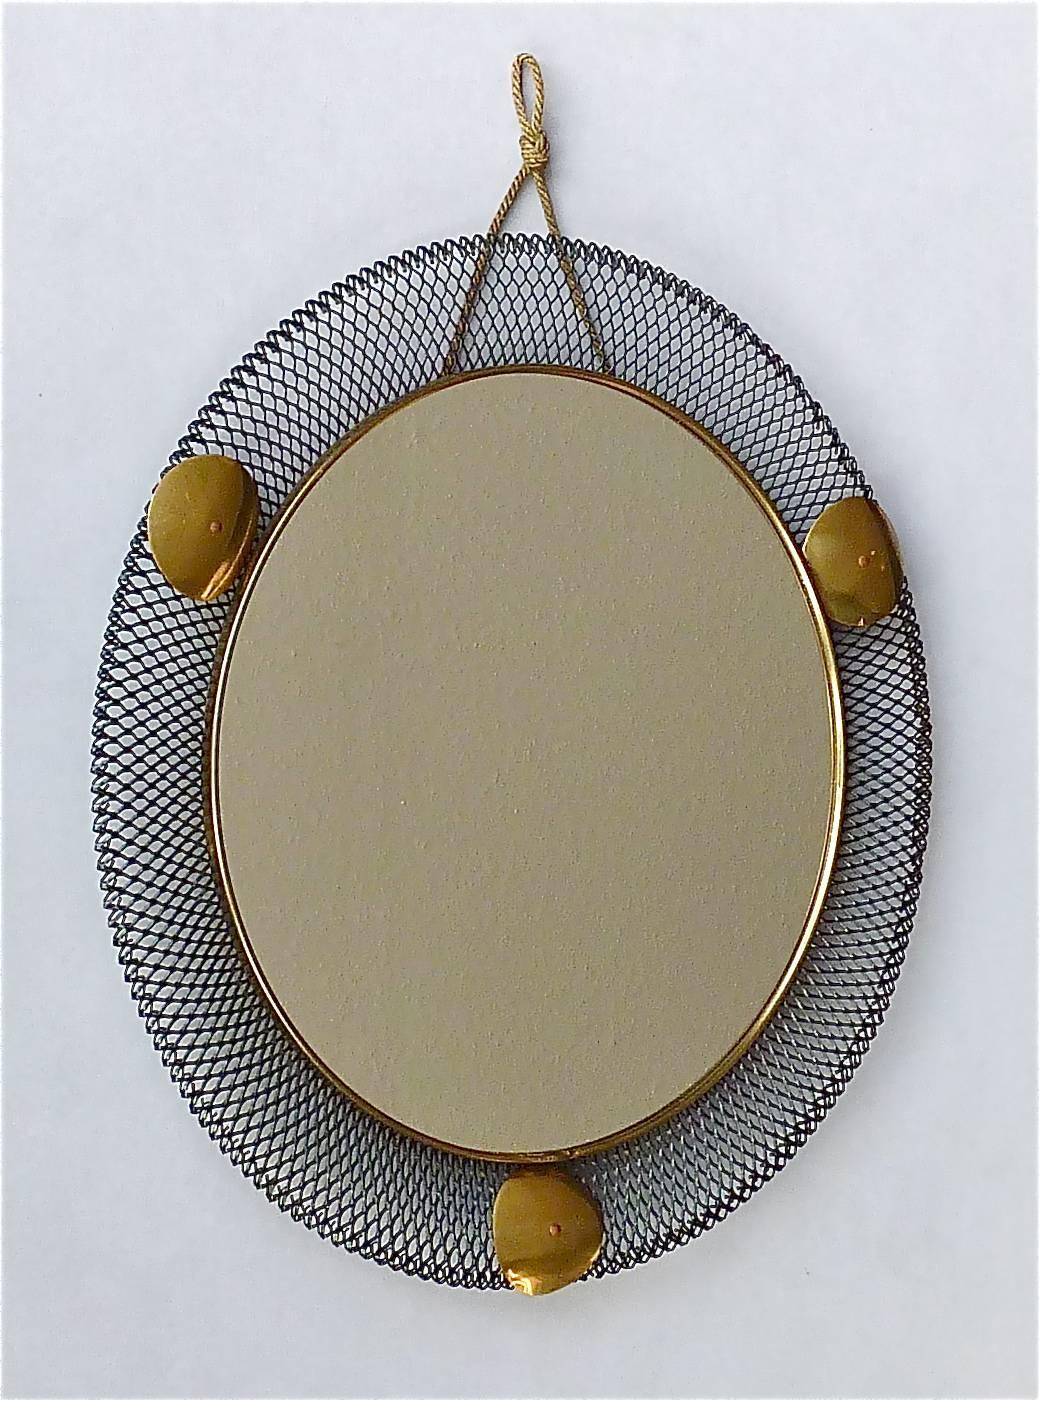 French Round Black Midcentury Wall Mirror Brass Stretched Metal 1955 Mategot Biny Style